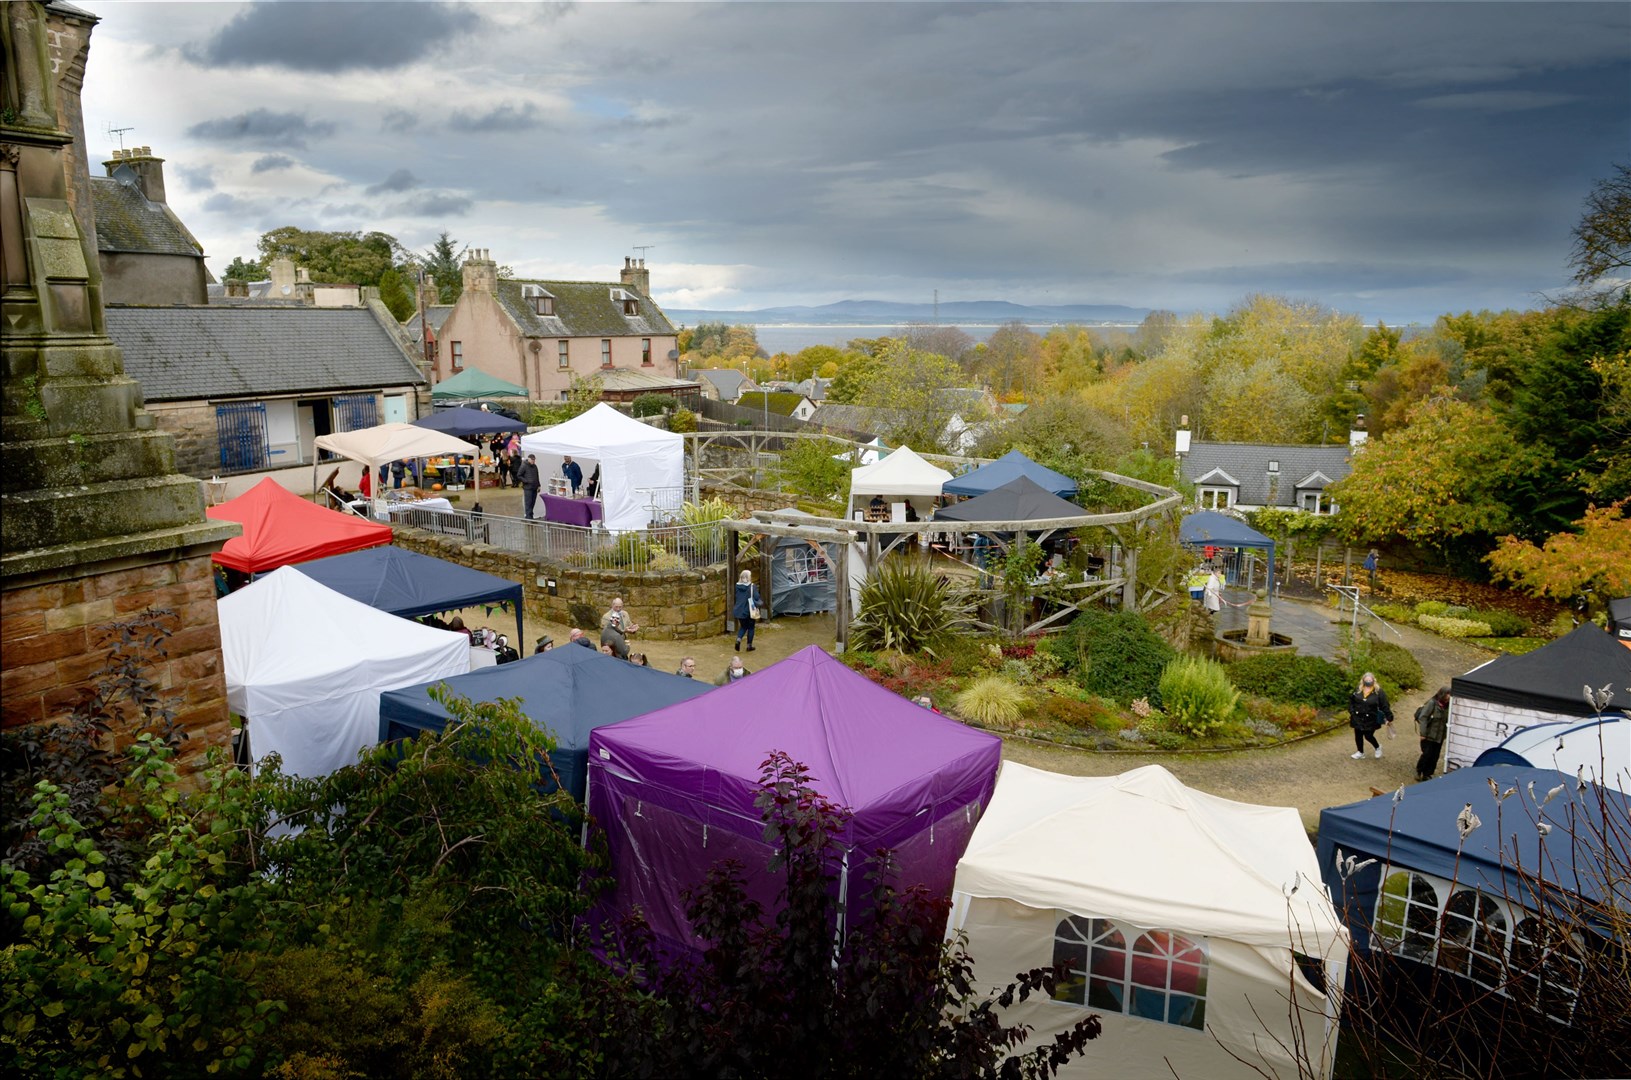 A Tain outdoor market last month. Picture: James Mackenzie.